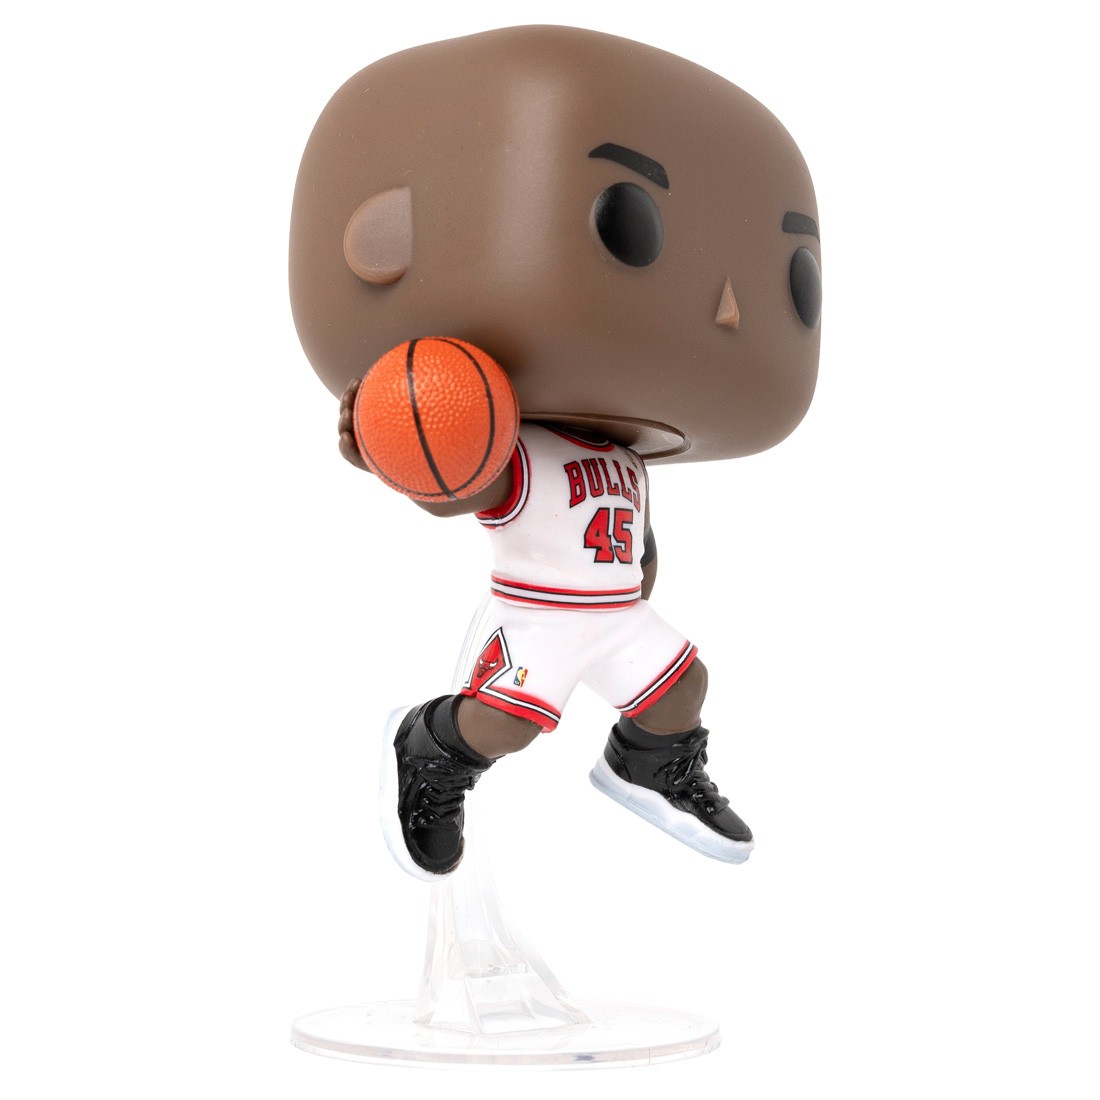 NBA Funko Pop! Michael Jordan (1992 All Star) (White Jersey) #114 now  available at Balyot : r/funkopop